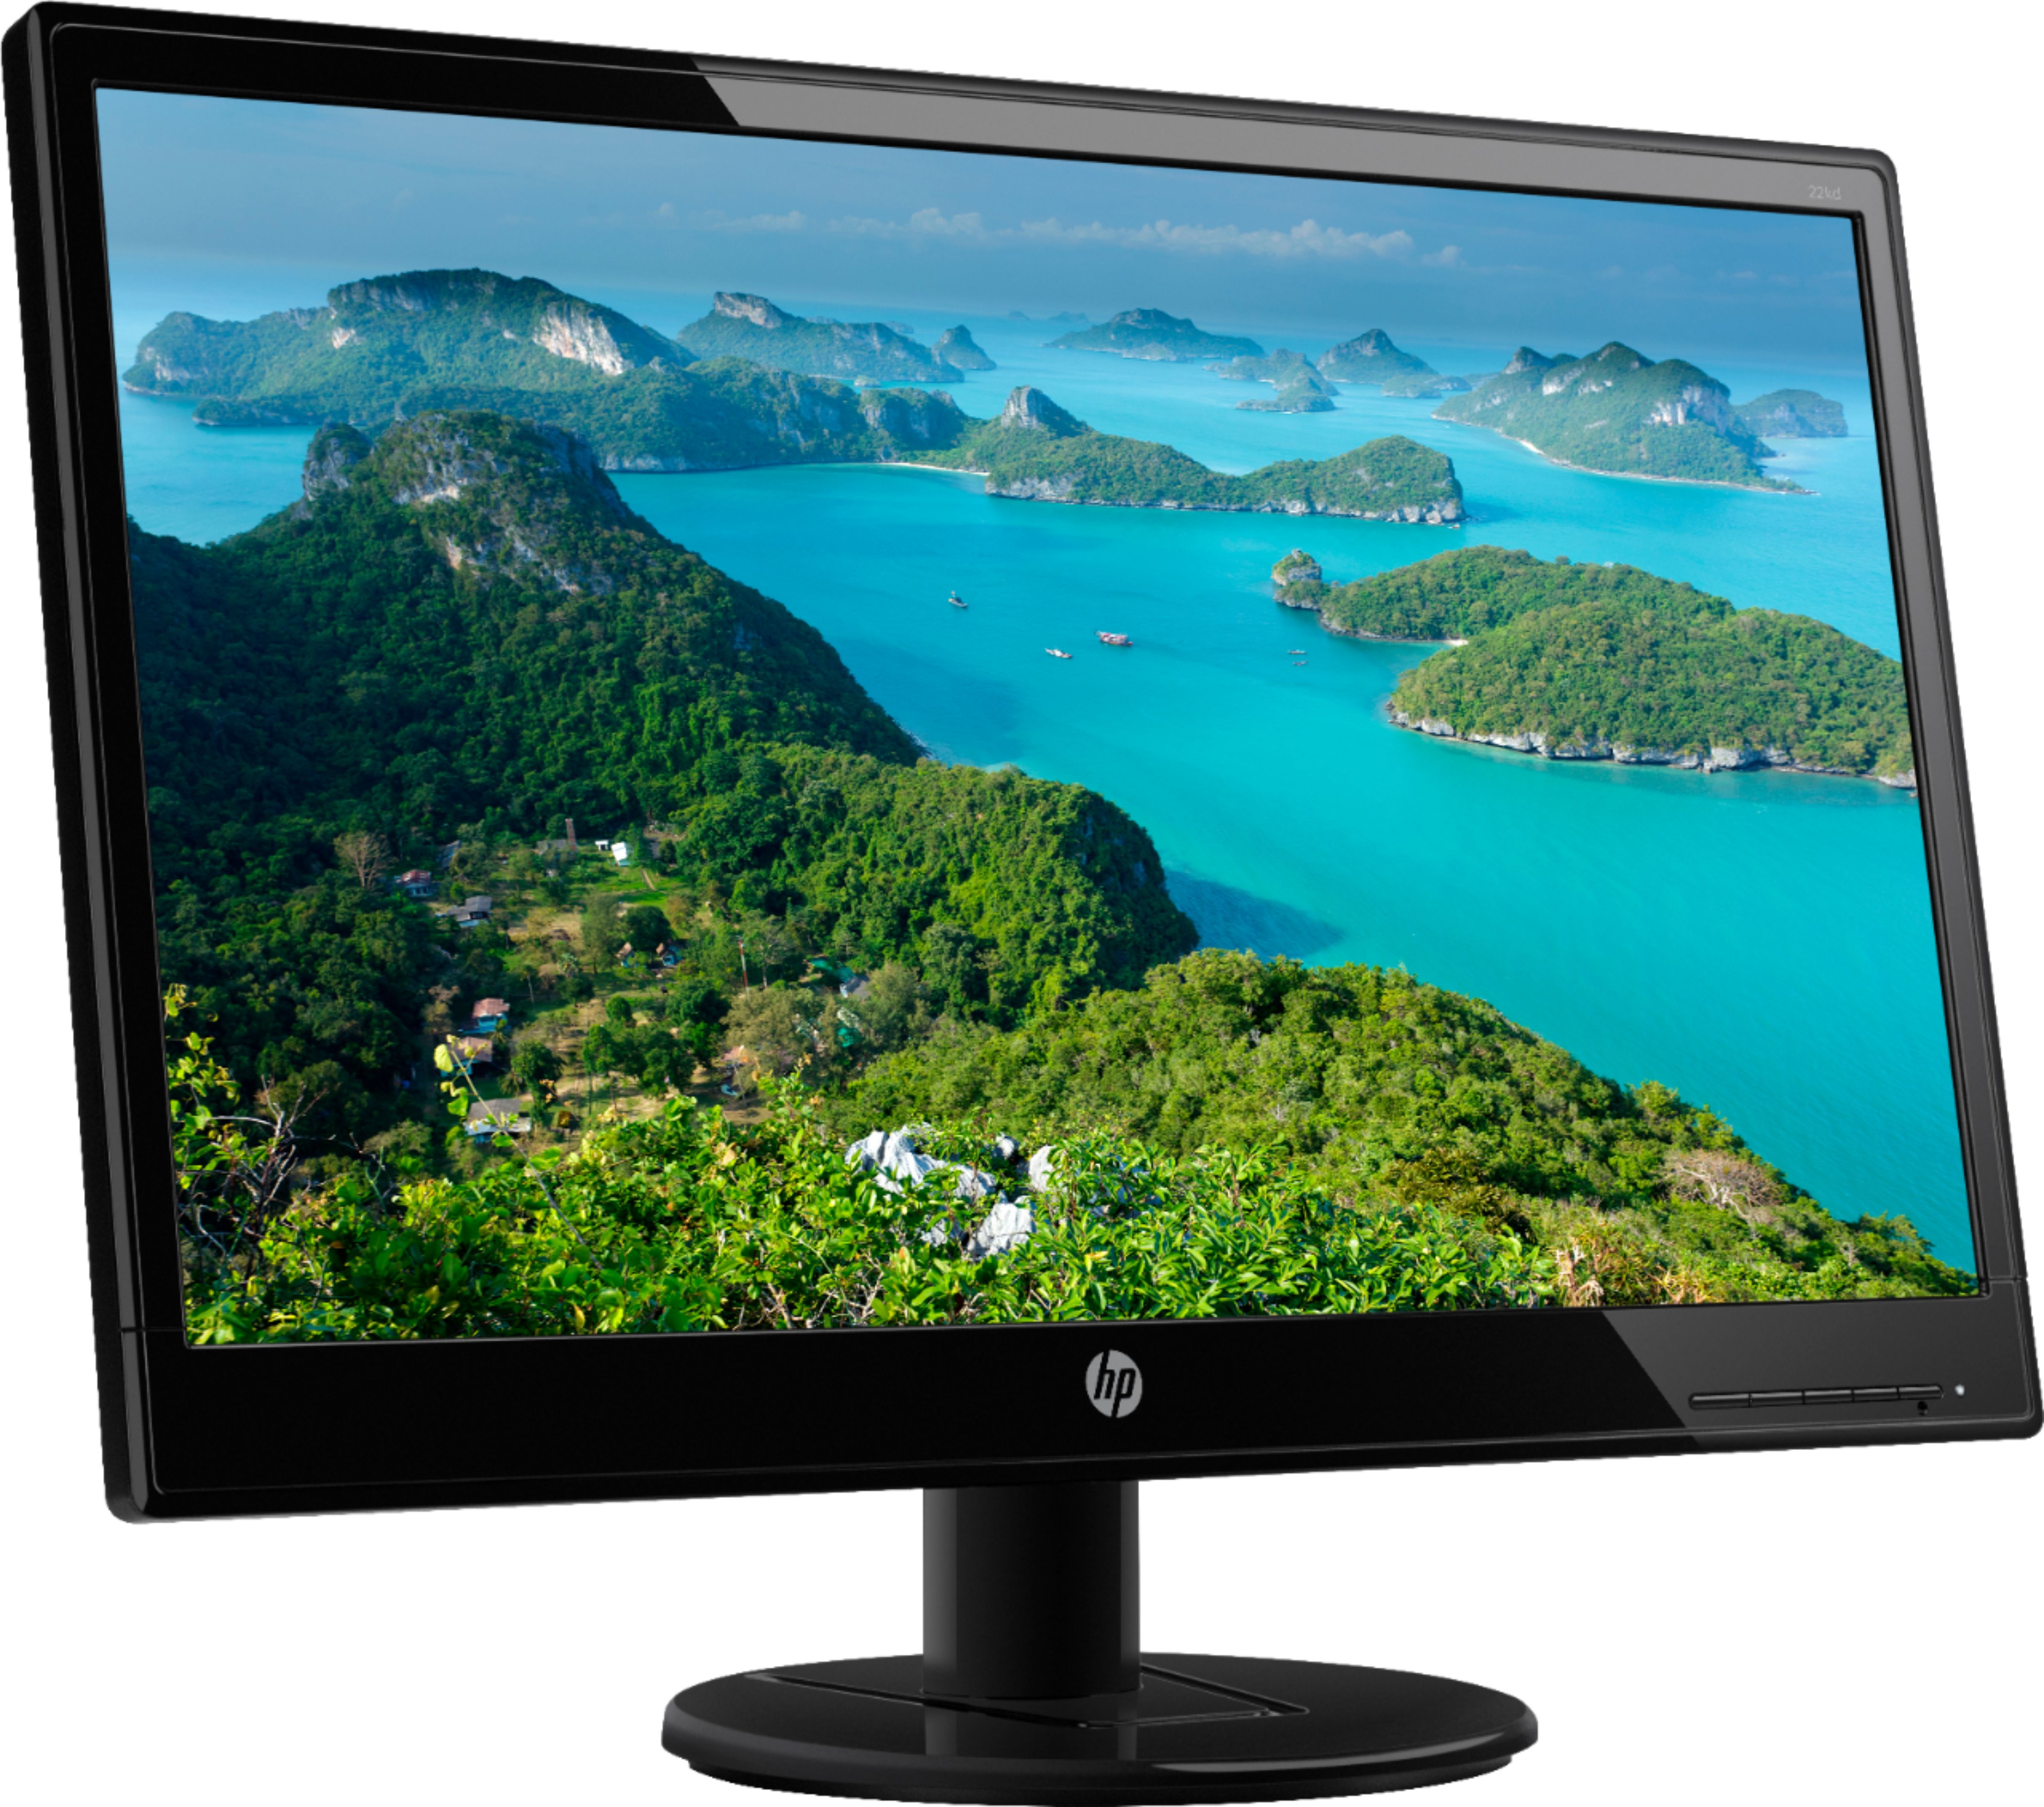 Angle View: HP - Geek Squad Certified Refurbished 20.7" LED FHD Monitor - Black